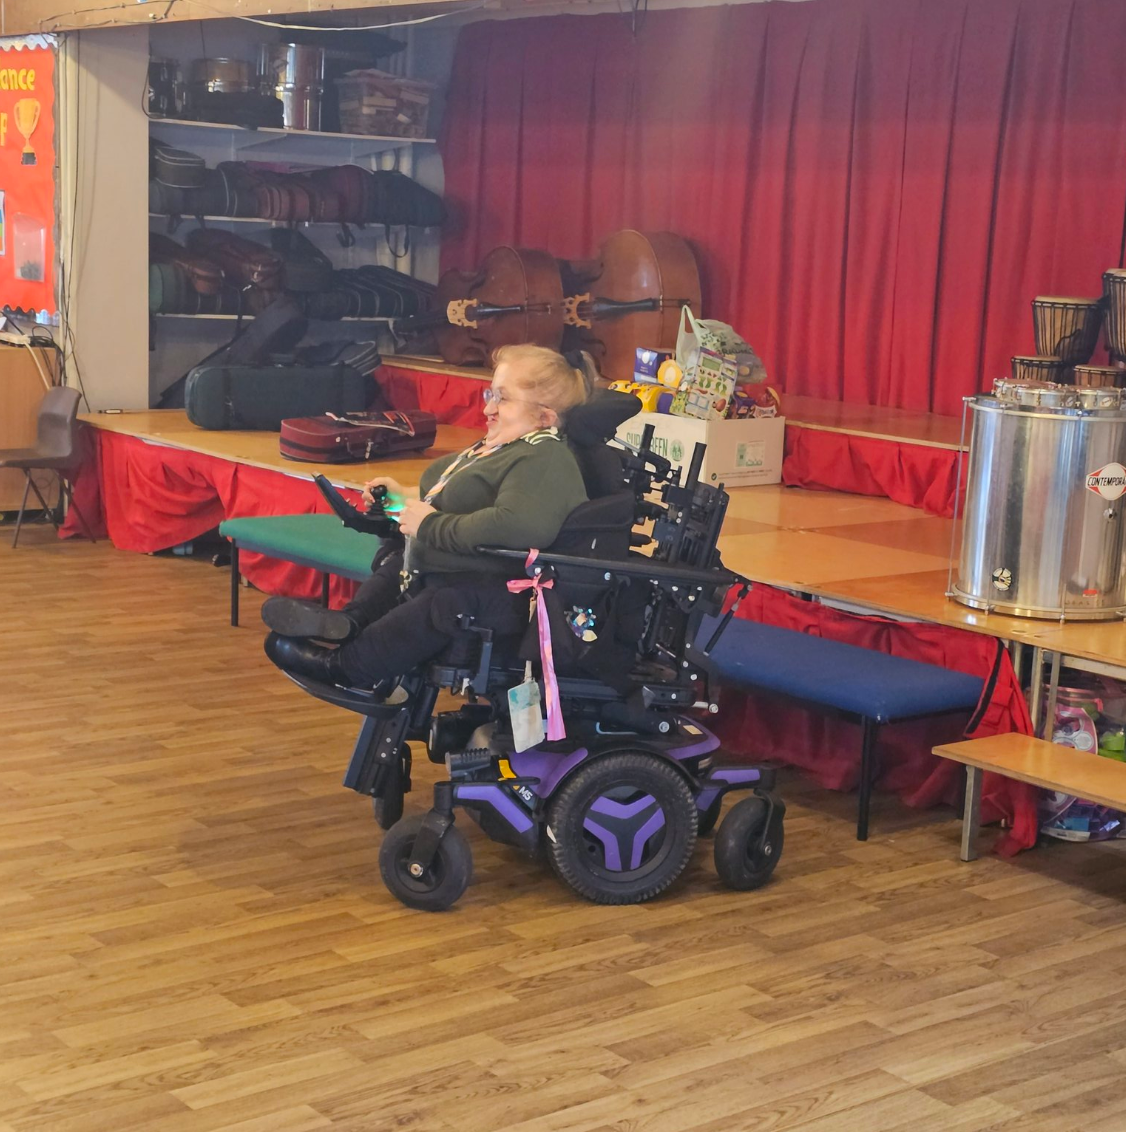 In her role as a development officer at Disability Wales, Ms Watkins educates children and schools about the UN Convention on the Rights of Persons with Disabilities